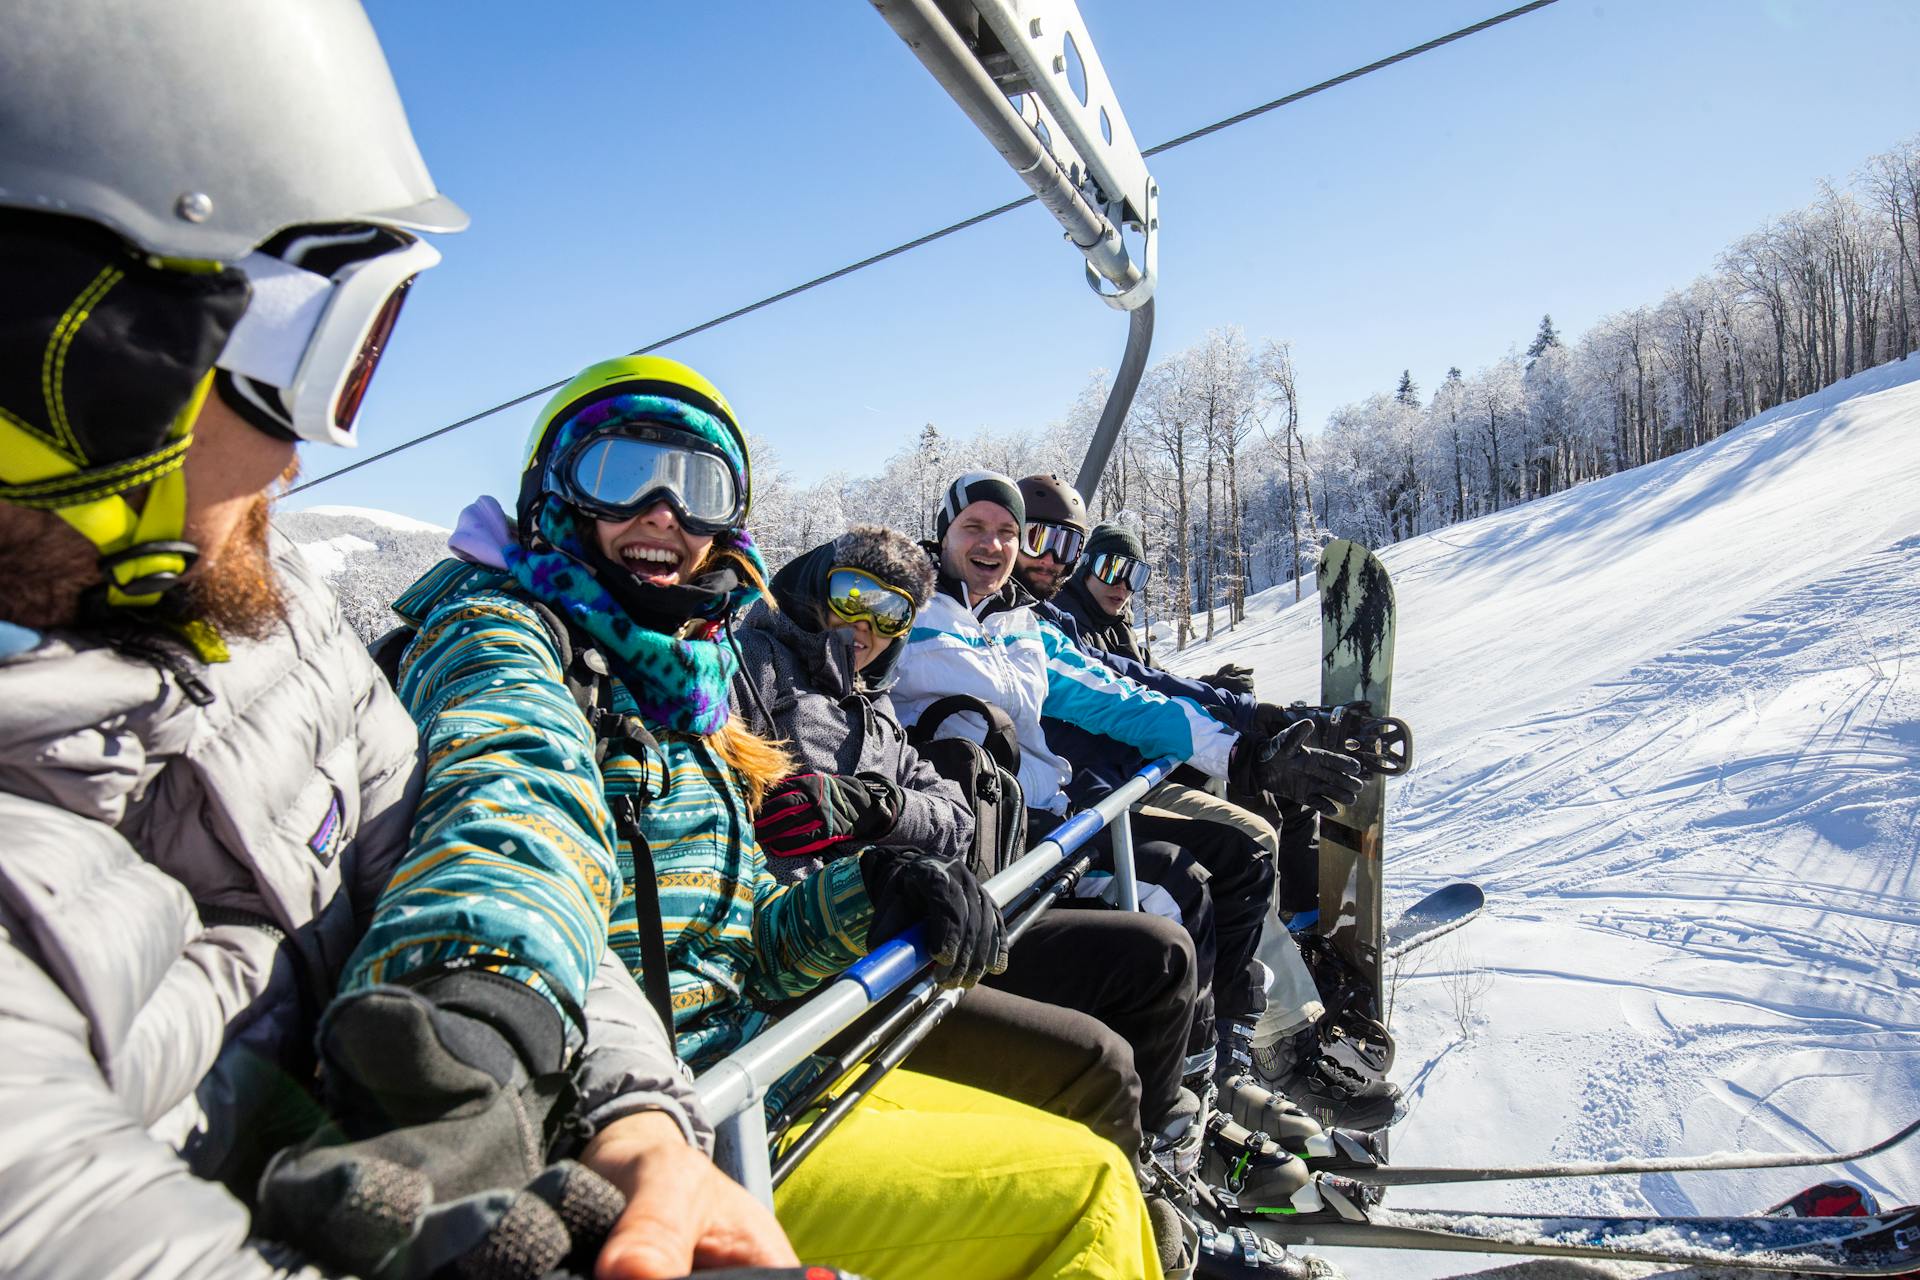 skiers smiling on chairlift at ski resort